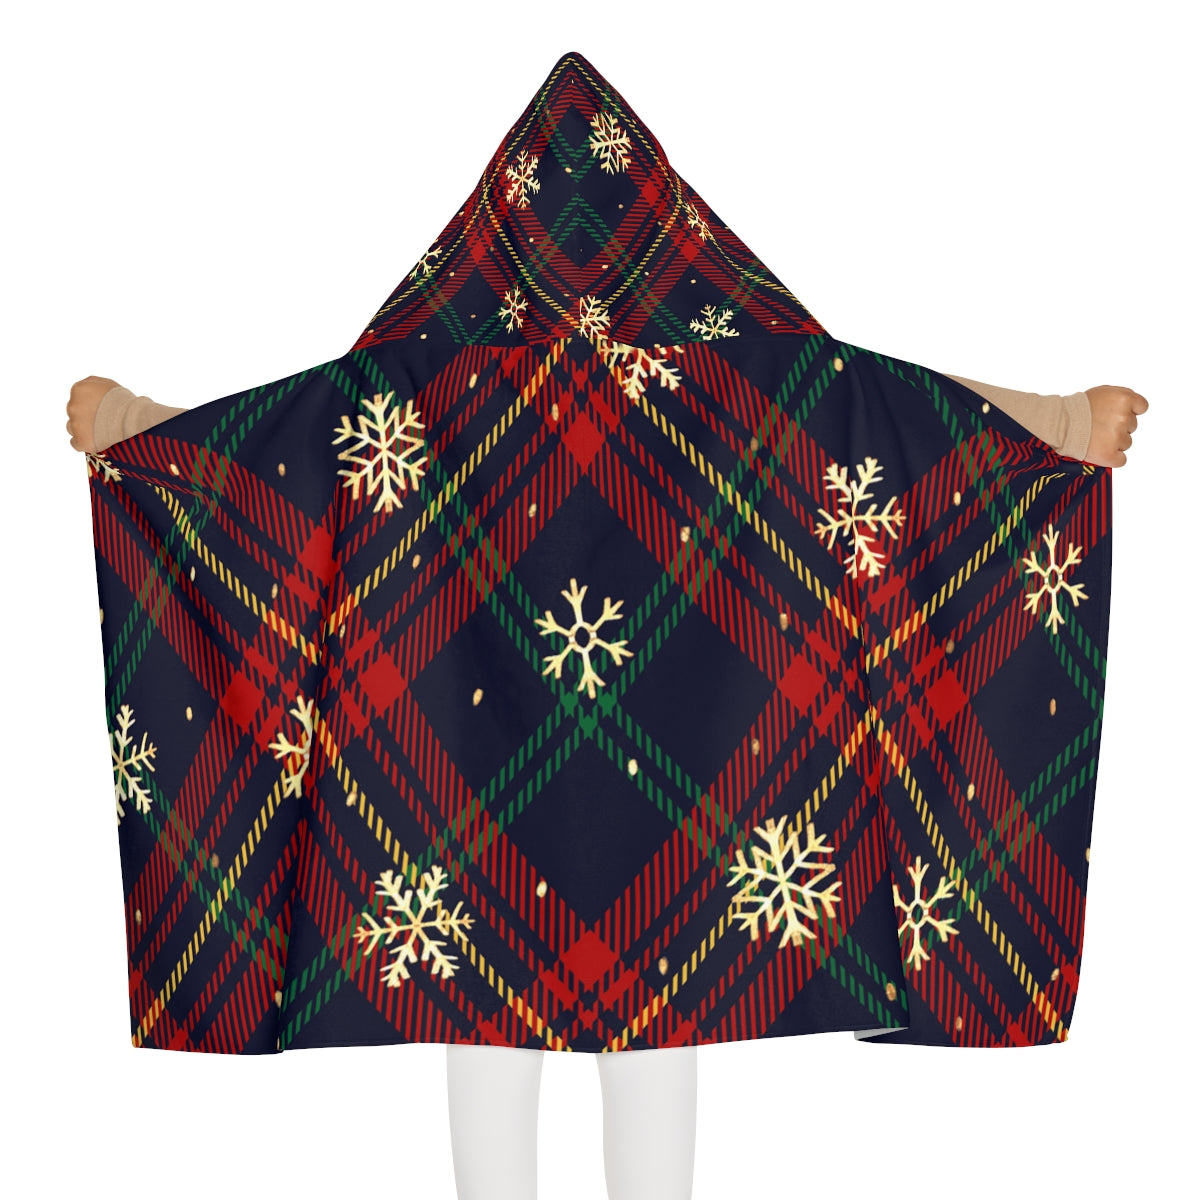 Spirit & Sparkle Youth Hooded Towel